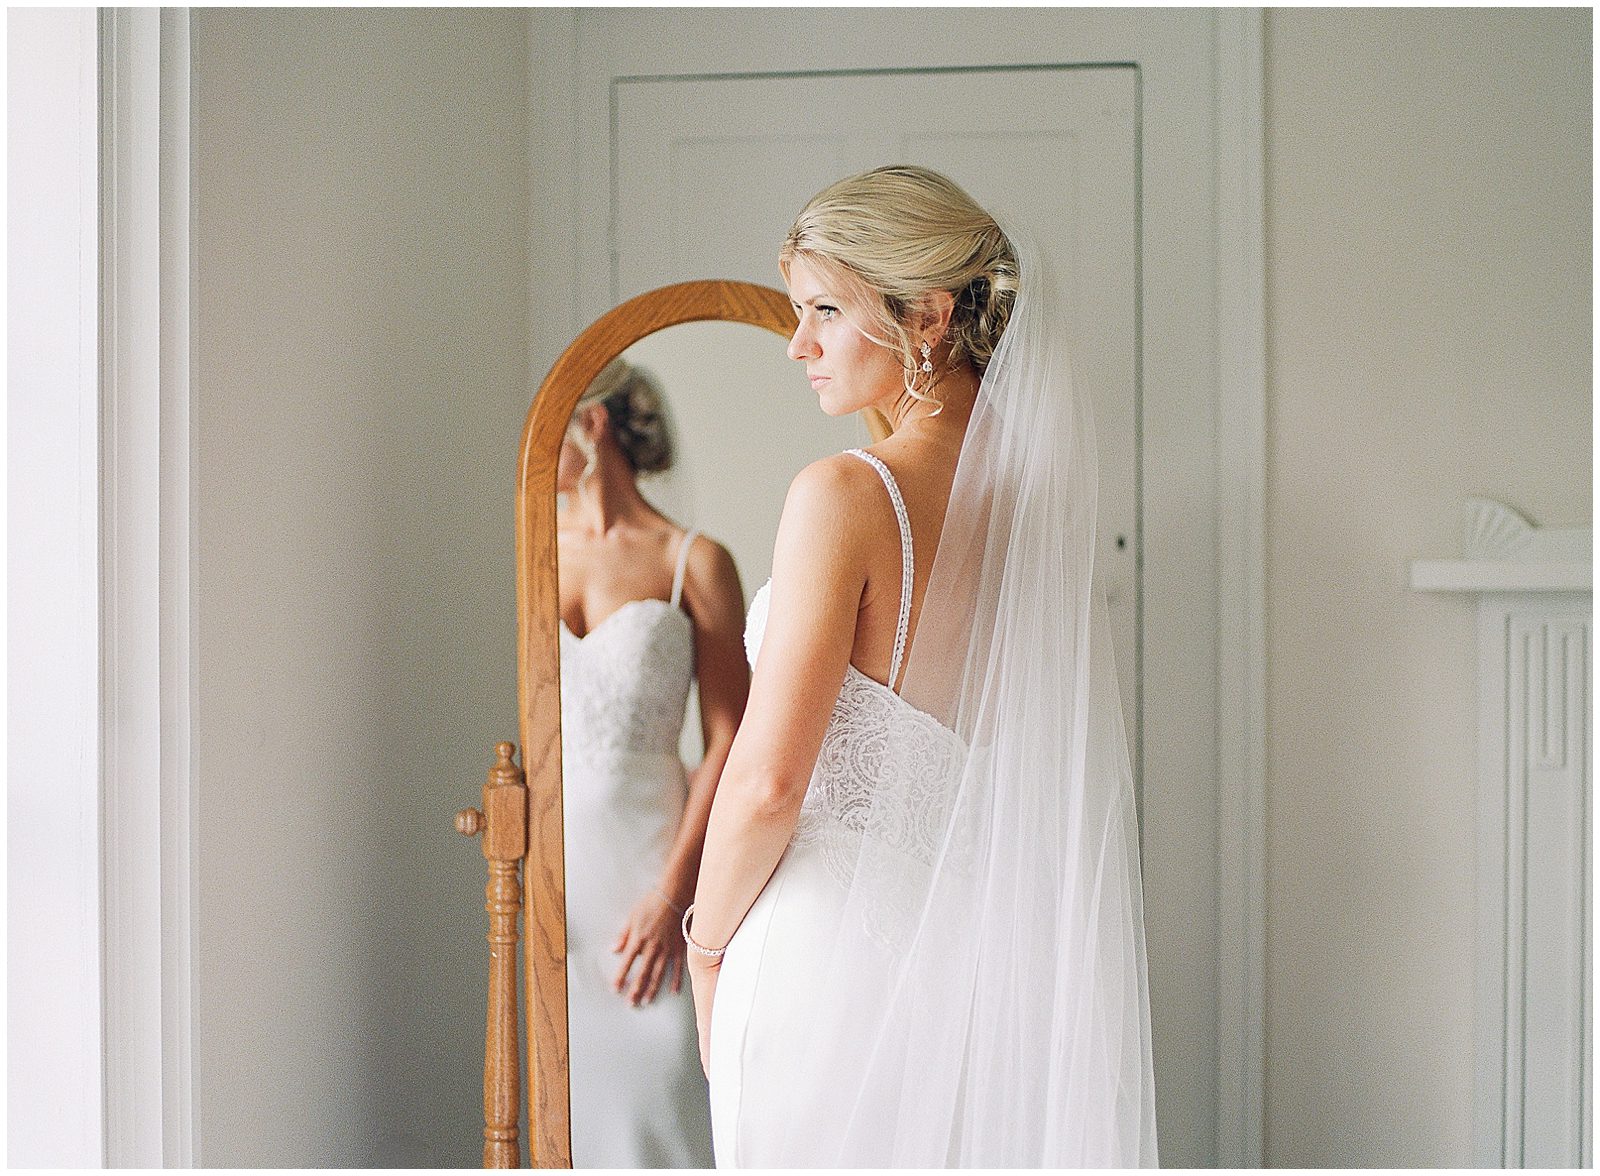 Bride Looking Out the Window While Getting Ready Photo